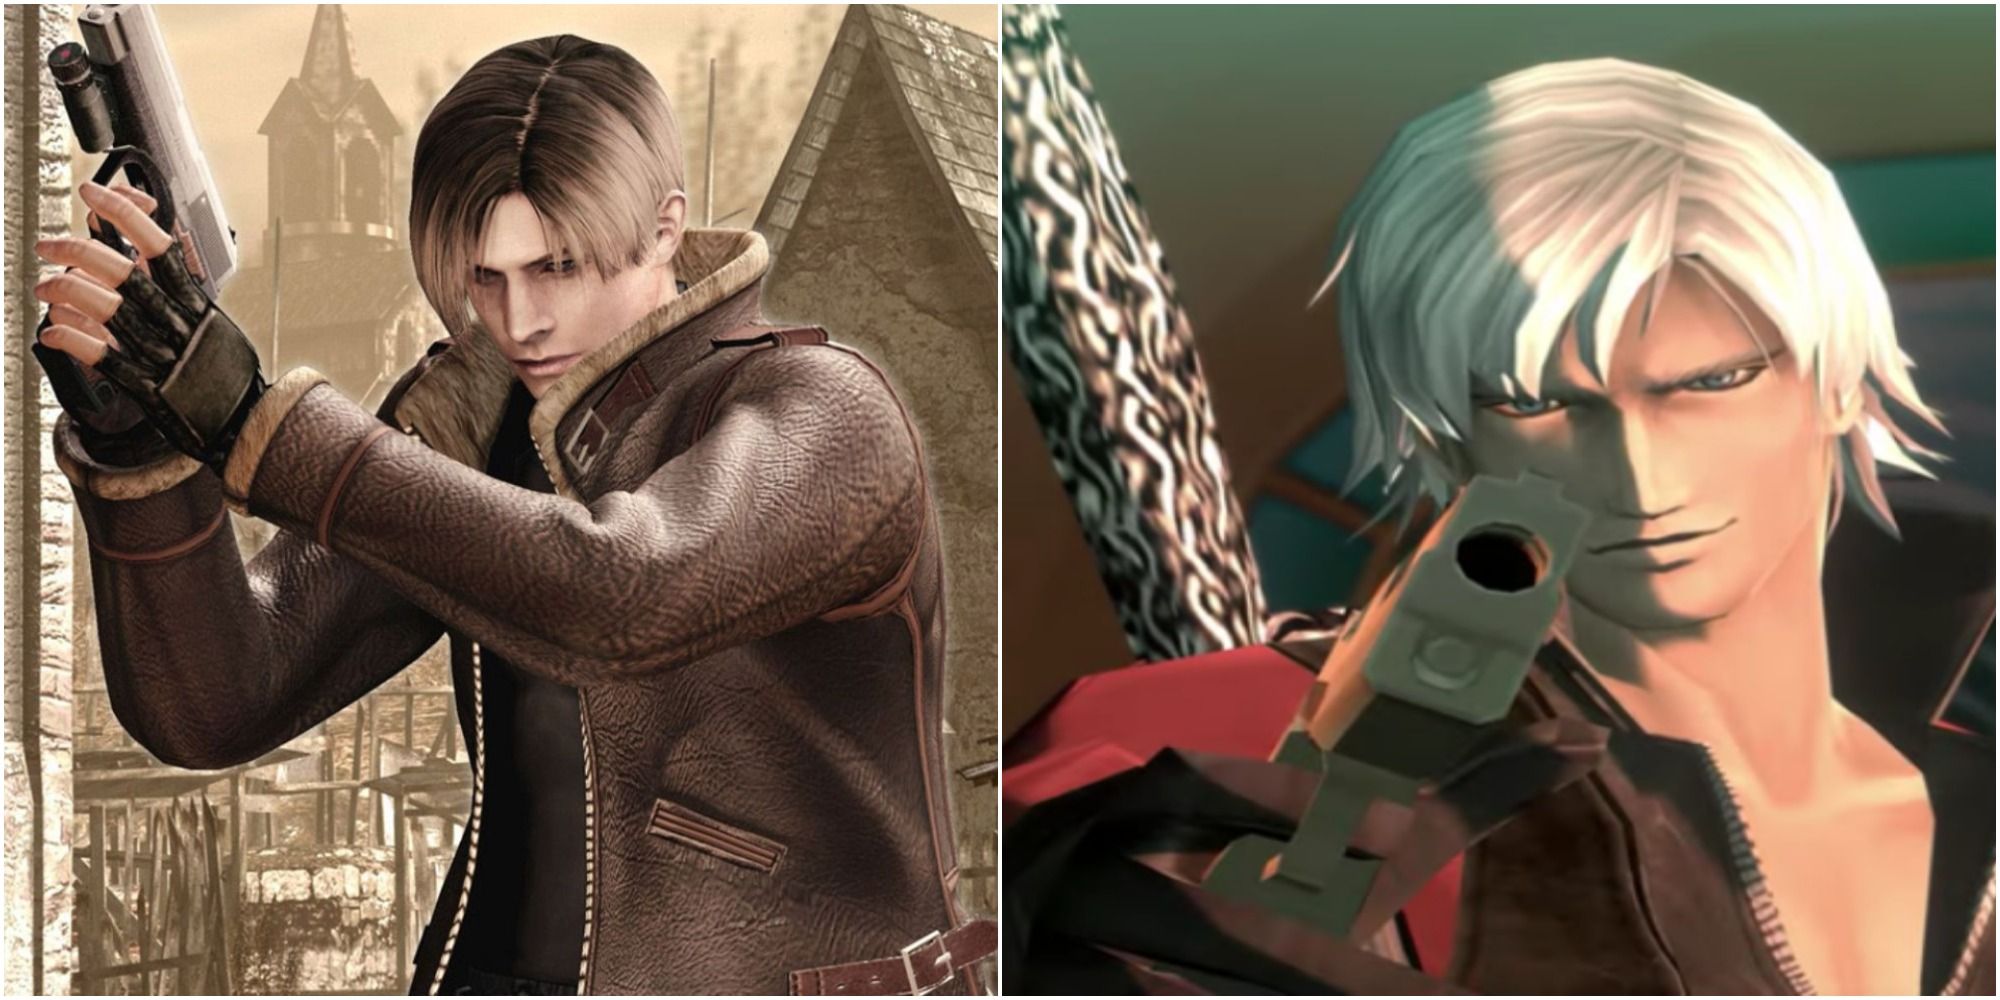 Leon aiming holding his pistol against the background of the Village, and Shin Megami Tensei Dante aiming his pistol at the screen, left to right